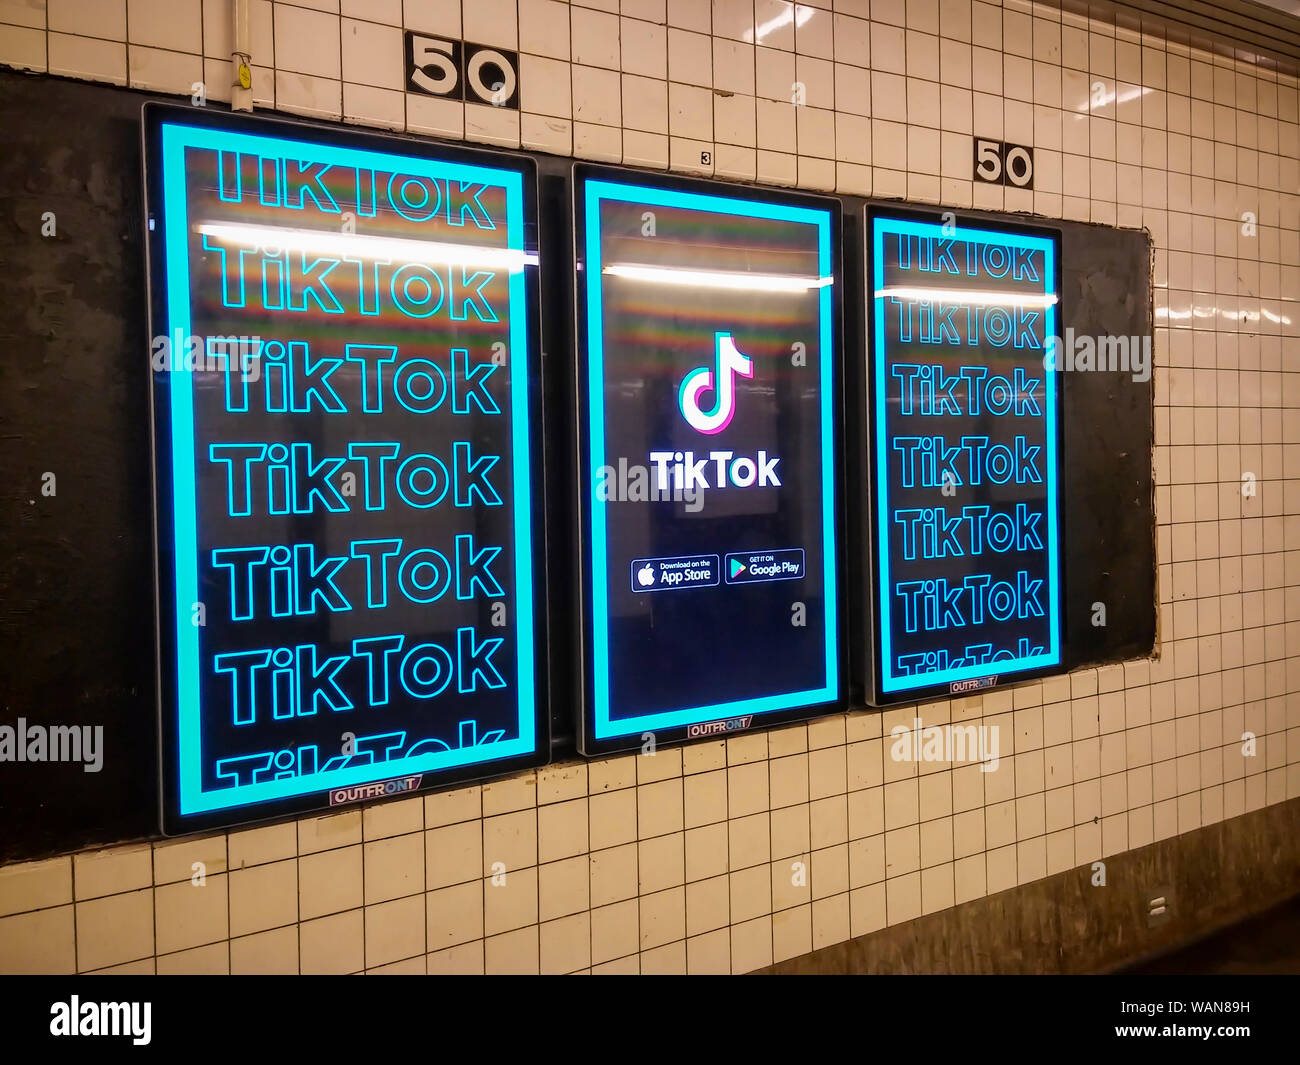 Advertising for the Chinese video platform TikTok in a subway station in New York on Tuesday, August 13, 2019. TikTok is a platform for users to post short-form mobile videos. (© Richard B. Levine) Stock Photo